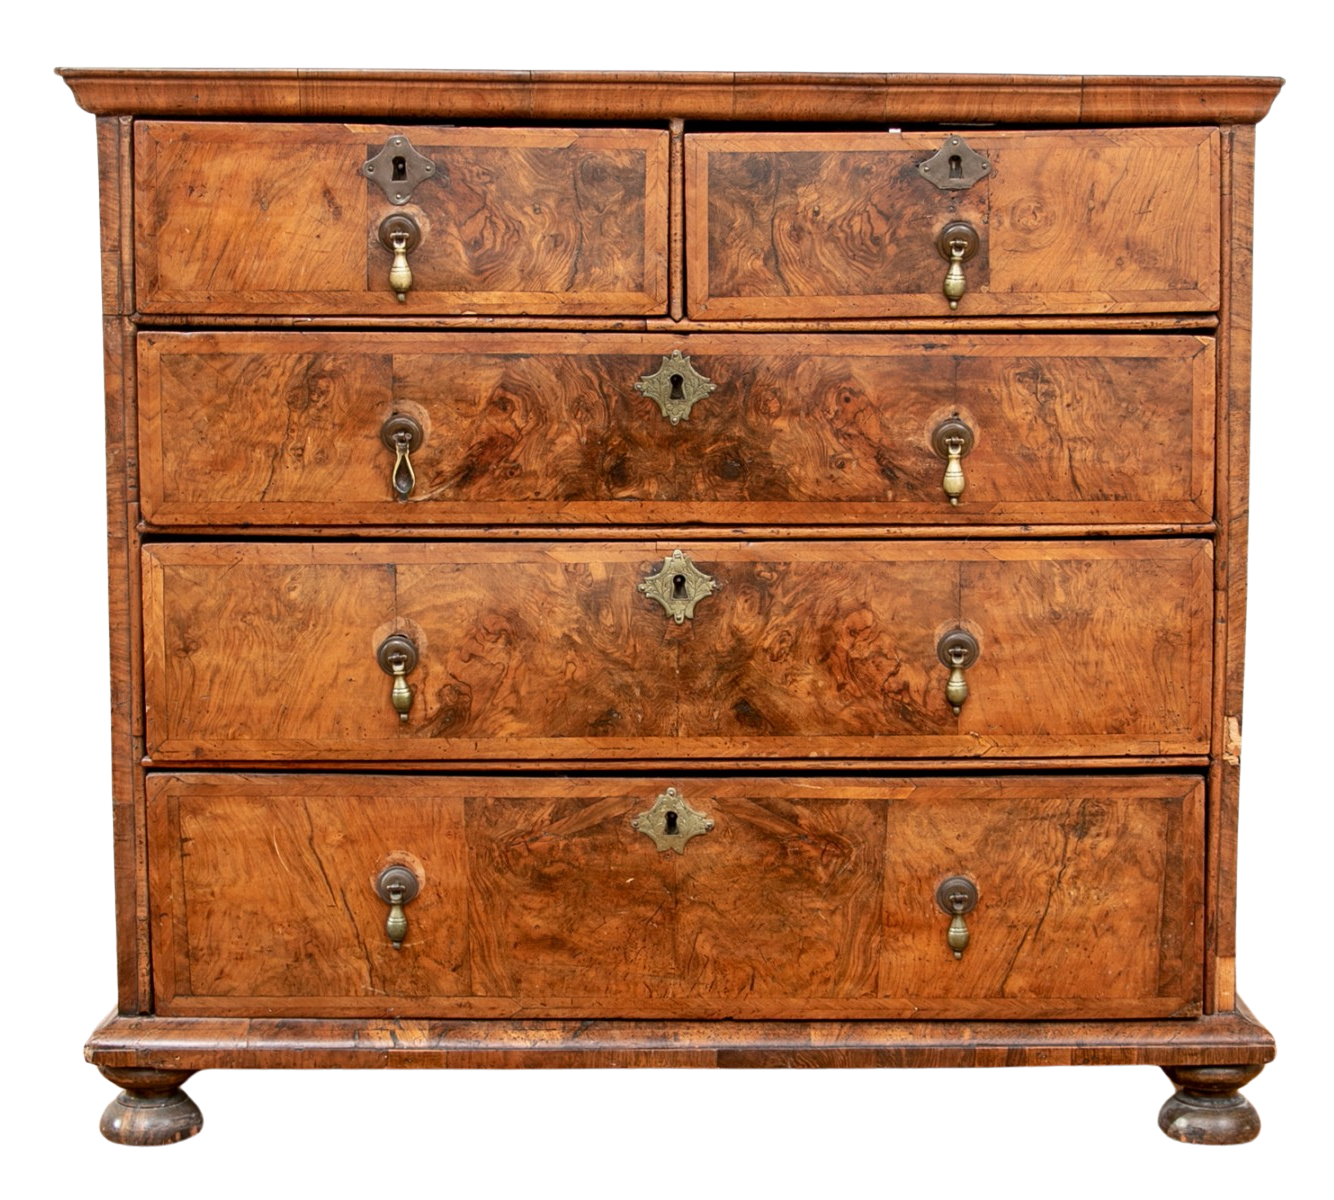 An 18th century antique William and Mary cross-banded burred walnut chest of drawers with brass drop pulls and escutcheons